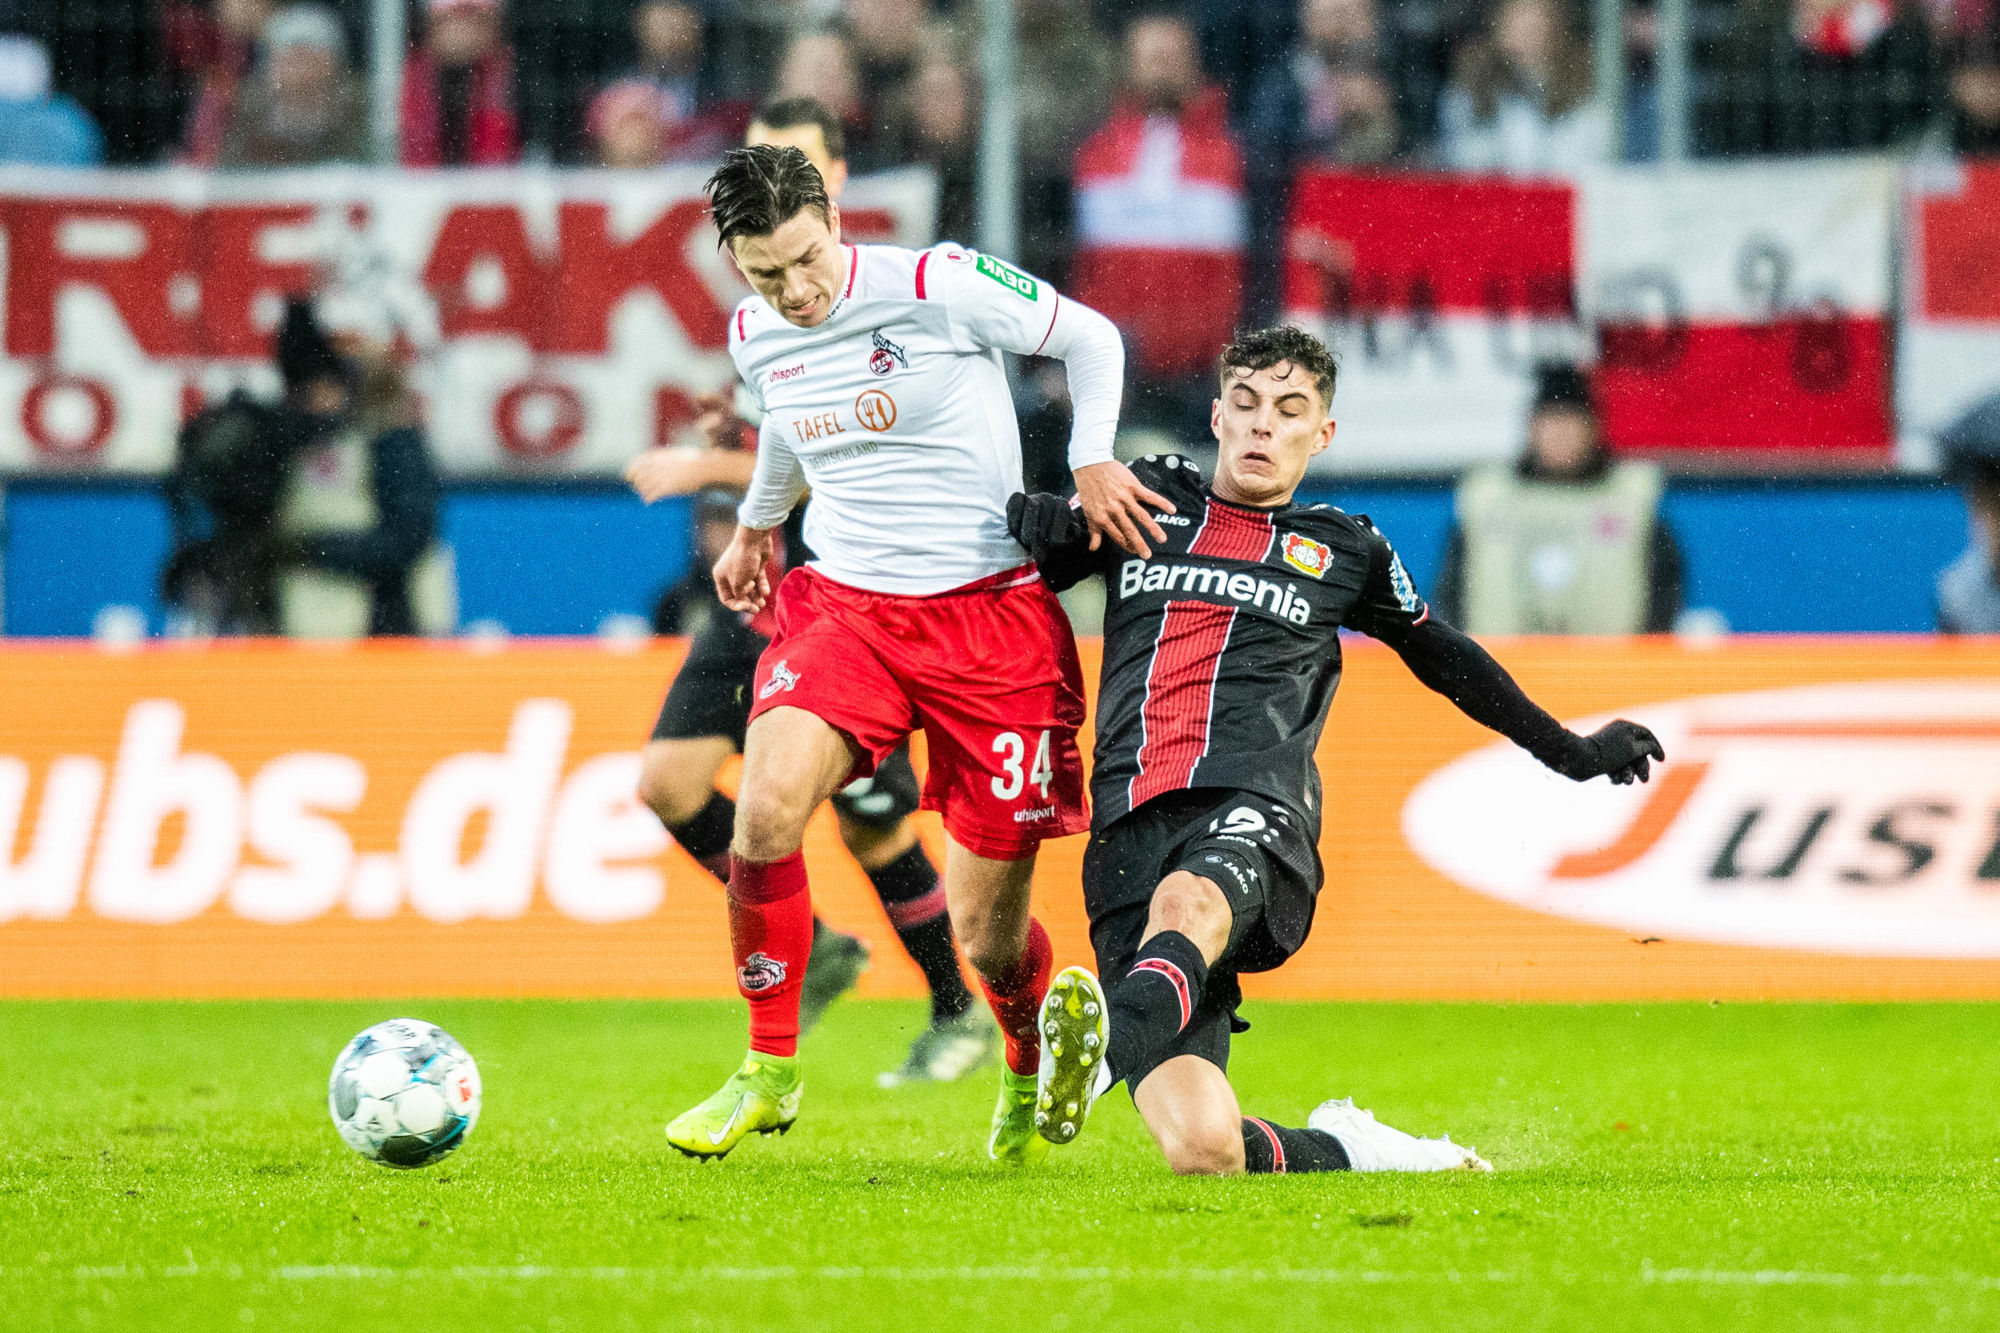 14 December 2019, North Rhine-Westphalia, Cologne: Soccer: Bundesliga, 1st FC Cologne - Bayer Leverkusen, 15th matchday in Rhein Energie Stadium. Cologne's Noah Katterbach (l) in duel with Leverkusen's Kai Havertz. Photo: Marcel Kusch/dpa - IMPORTANT NOTE: In accordance with the requirements of the DFL Deutsche Fu?ball Liga or the DFB Deutscher Fu?ball-Bund, it is prohibited to use or have used photographs taken in the stadium and/or the match in the form of sequence images and/or video-like photo sequences. 


Photo by Icon Sport - RheinEnergieStadion - Cologne (Allemagne)